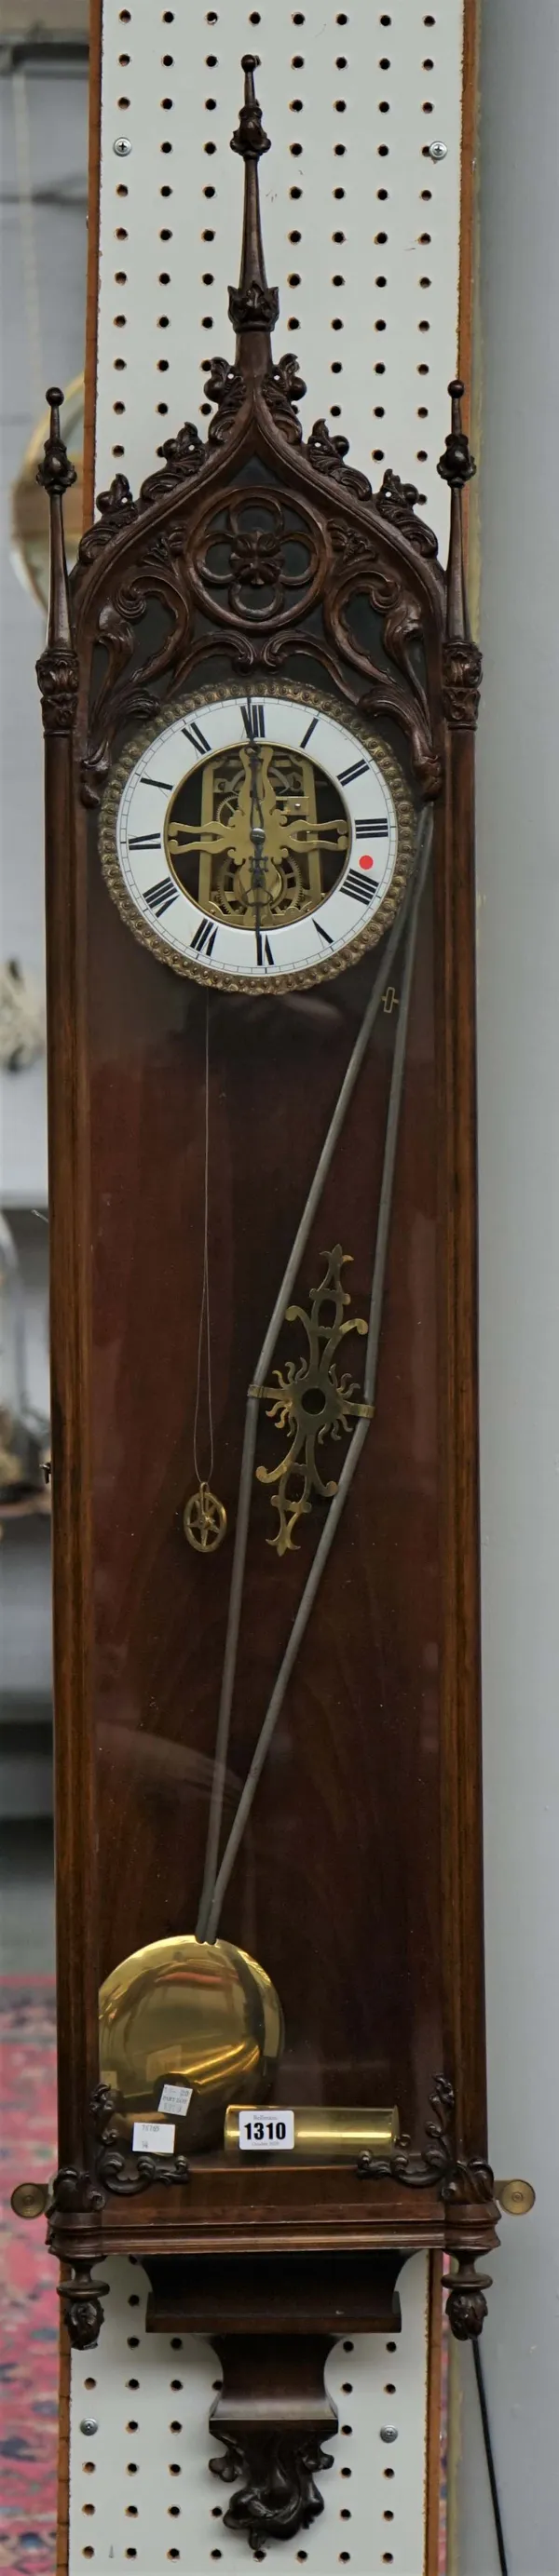 A Gothic Revival Vienna RegulatorLate 19th centuryWith skeletonised dial and plates, the steel chevron-shaped pendulum with central brass pierced pane